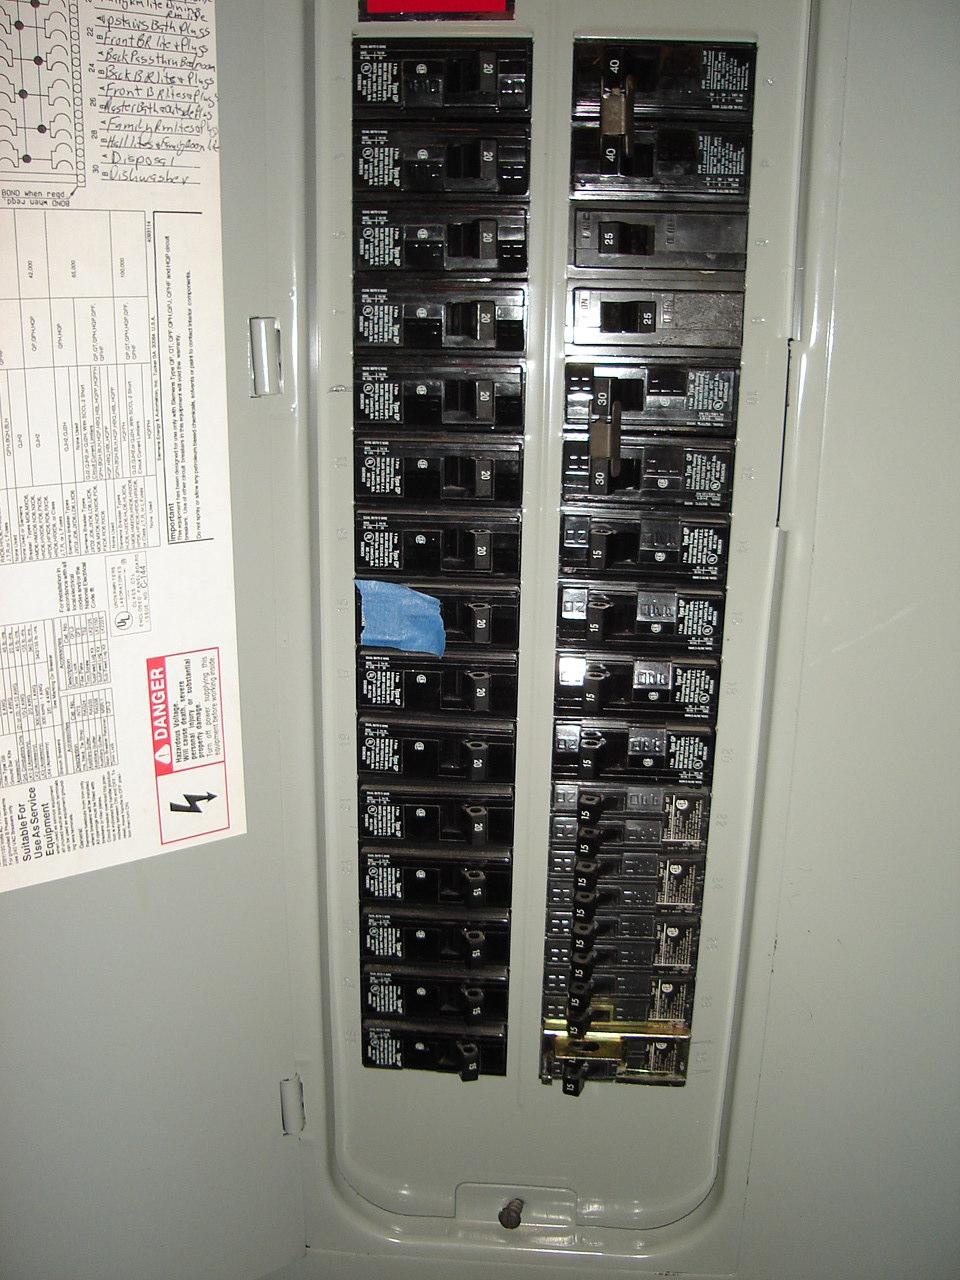 Pandharipande Report Date: 3/13/2008 Page:10 Location:Electrical subpanels in the utility room.